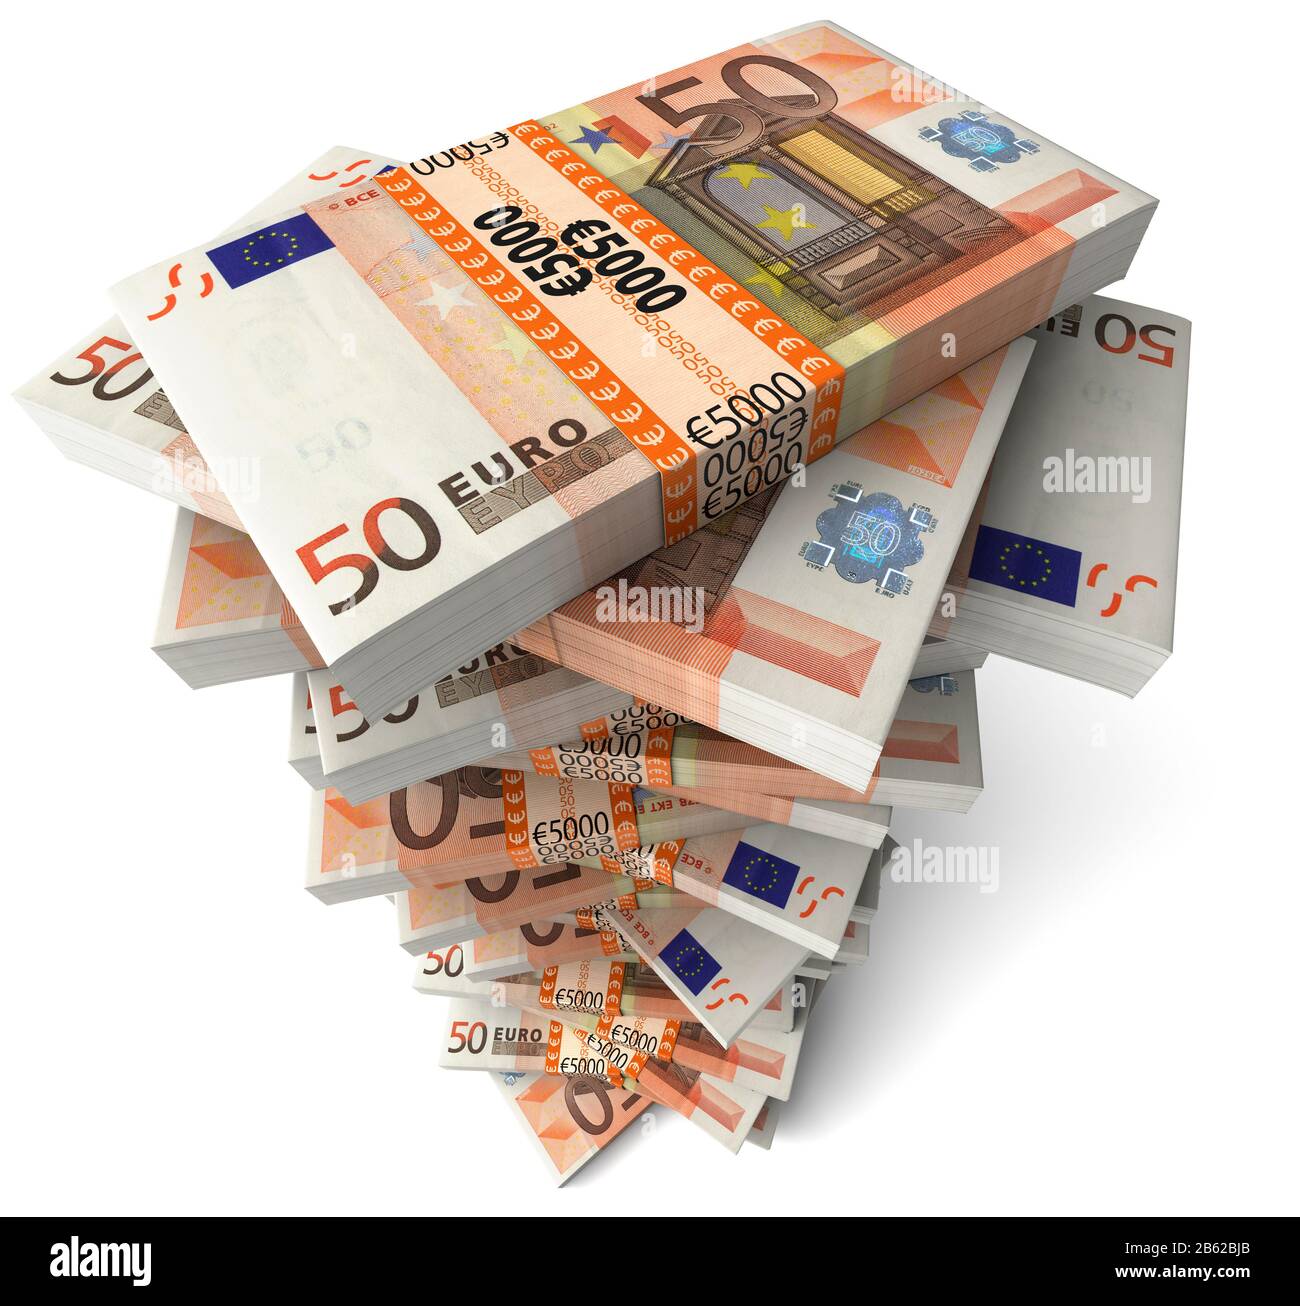 Euro notes stack of money. Wealth. Cash. 50 euro banknotes, white background. High Viewpoint. Debt. Finance. Stock Photo